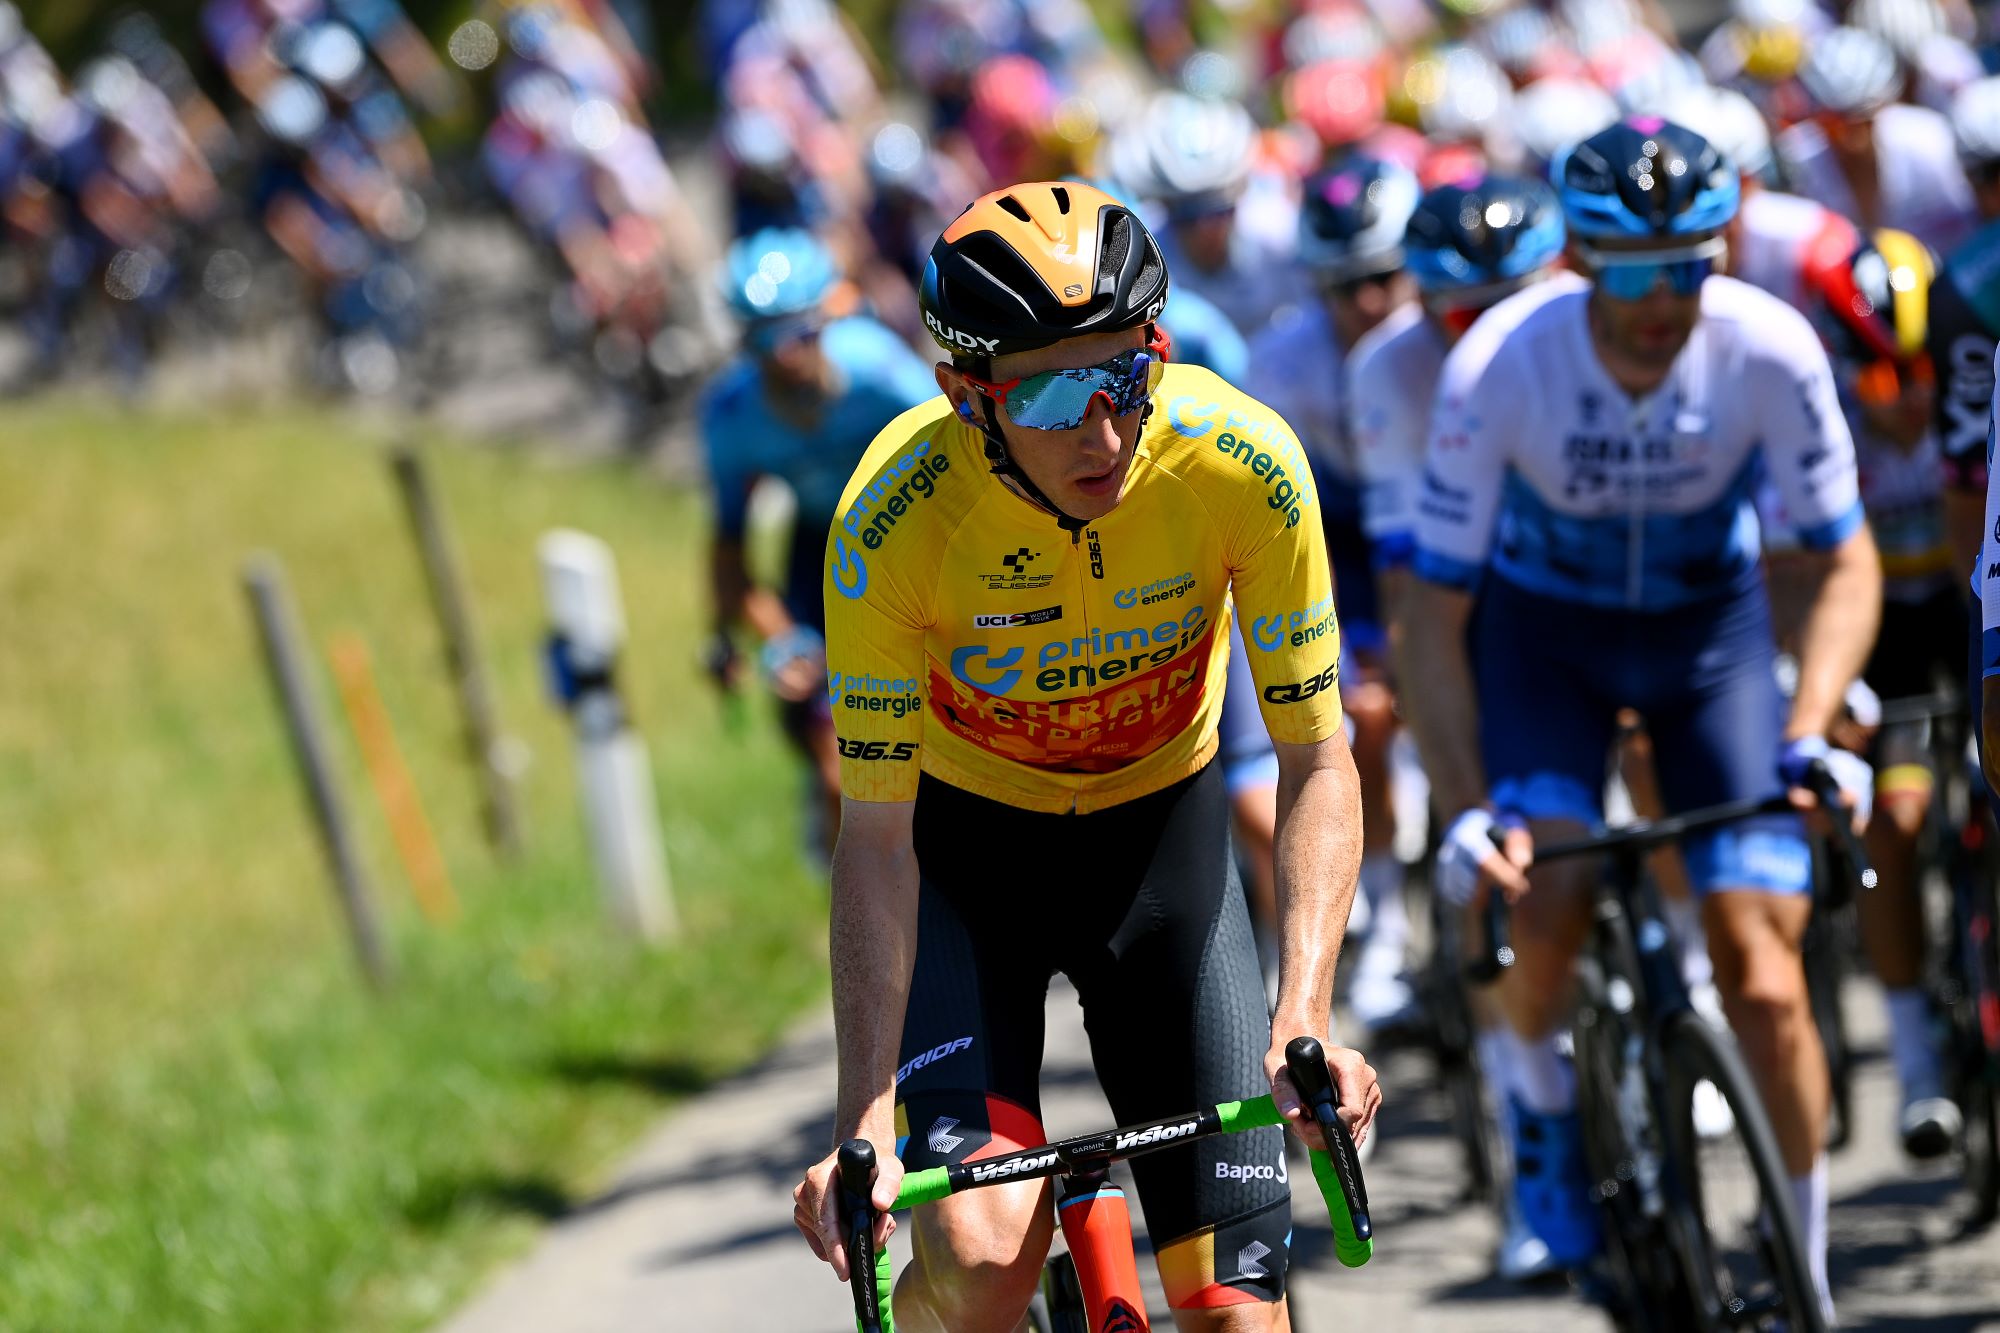 Stephen Williams wearing leaders jersey at Tour de Suisse 2022